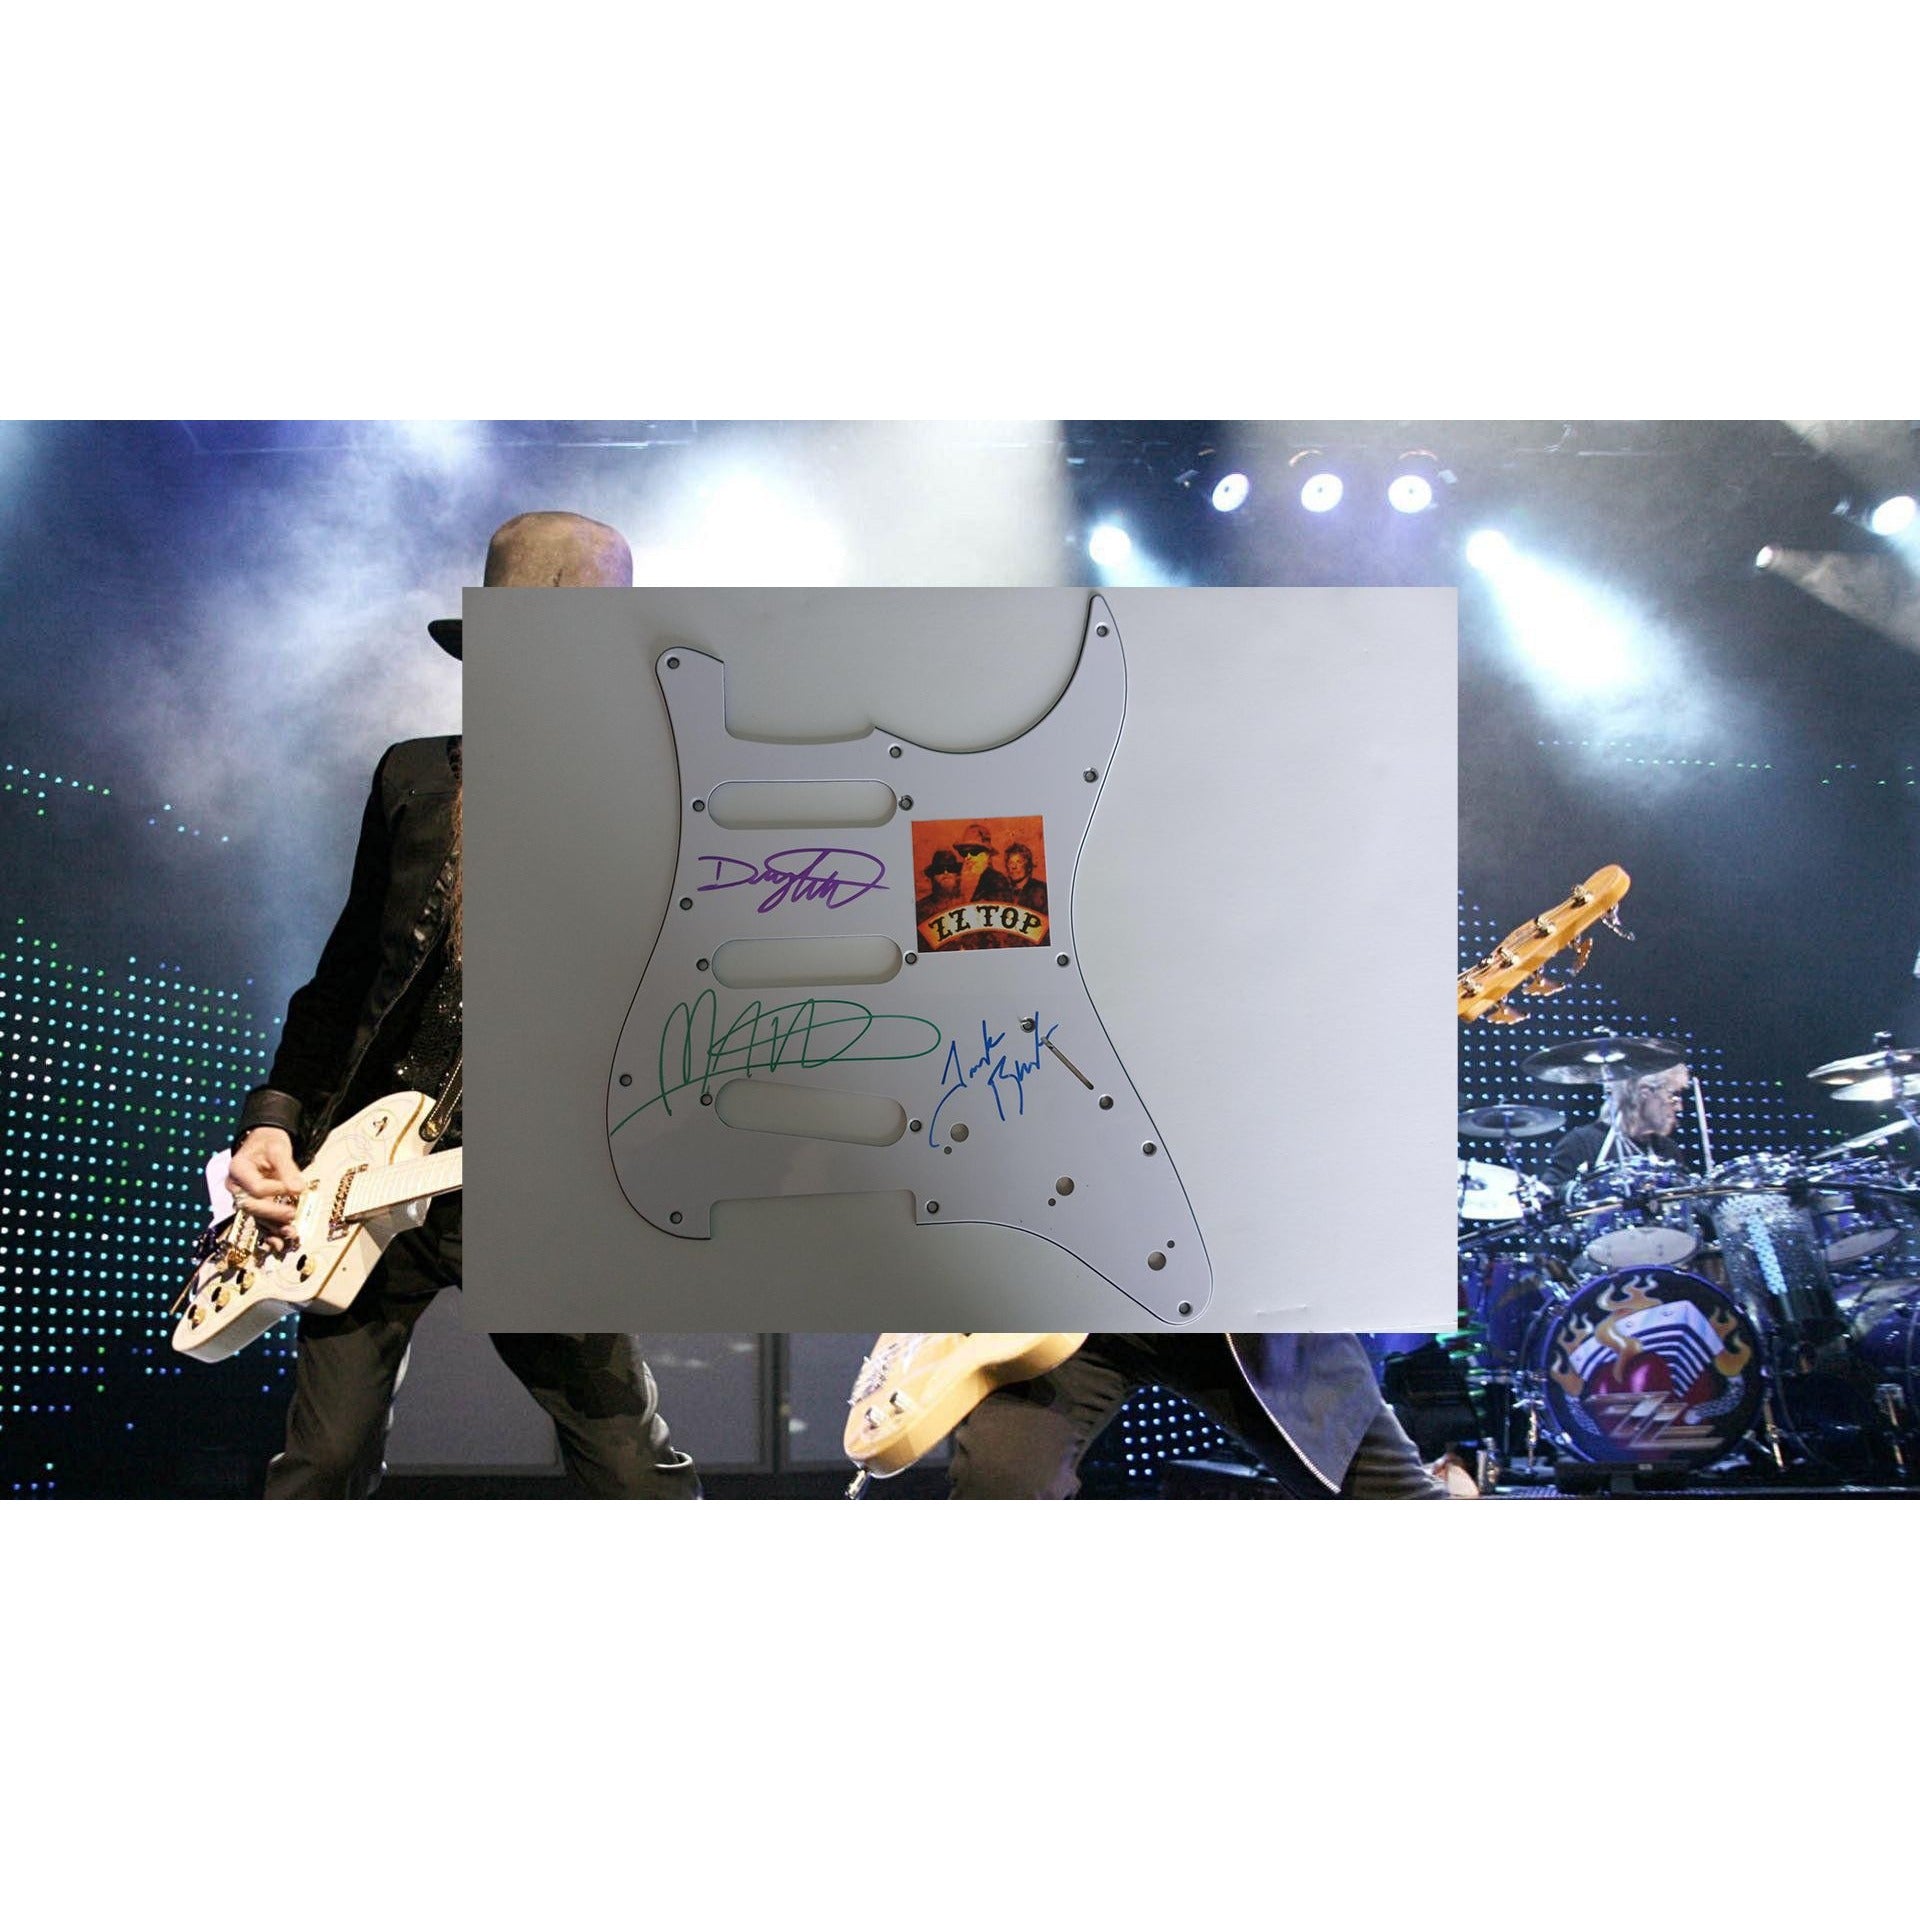 ZZ Top Billy Gibbons Frank Beard Dusty Hill electric guitar pickguard signed with proof